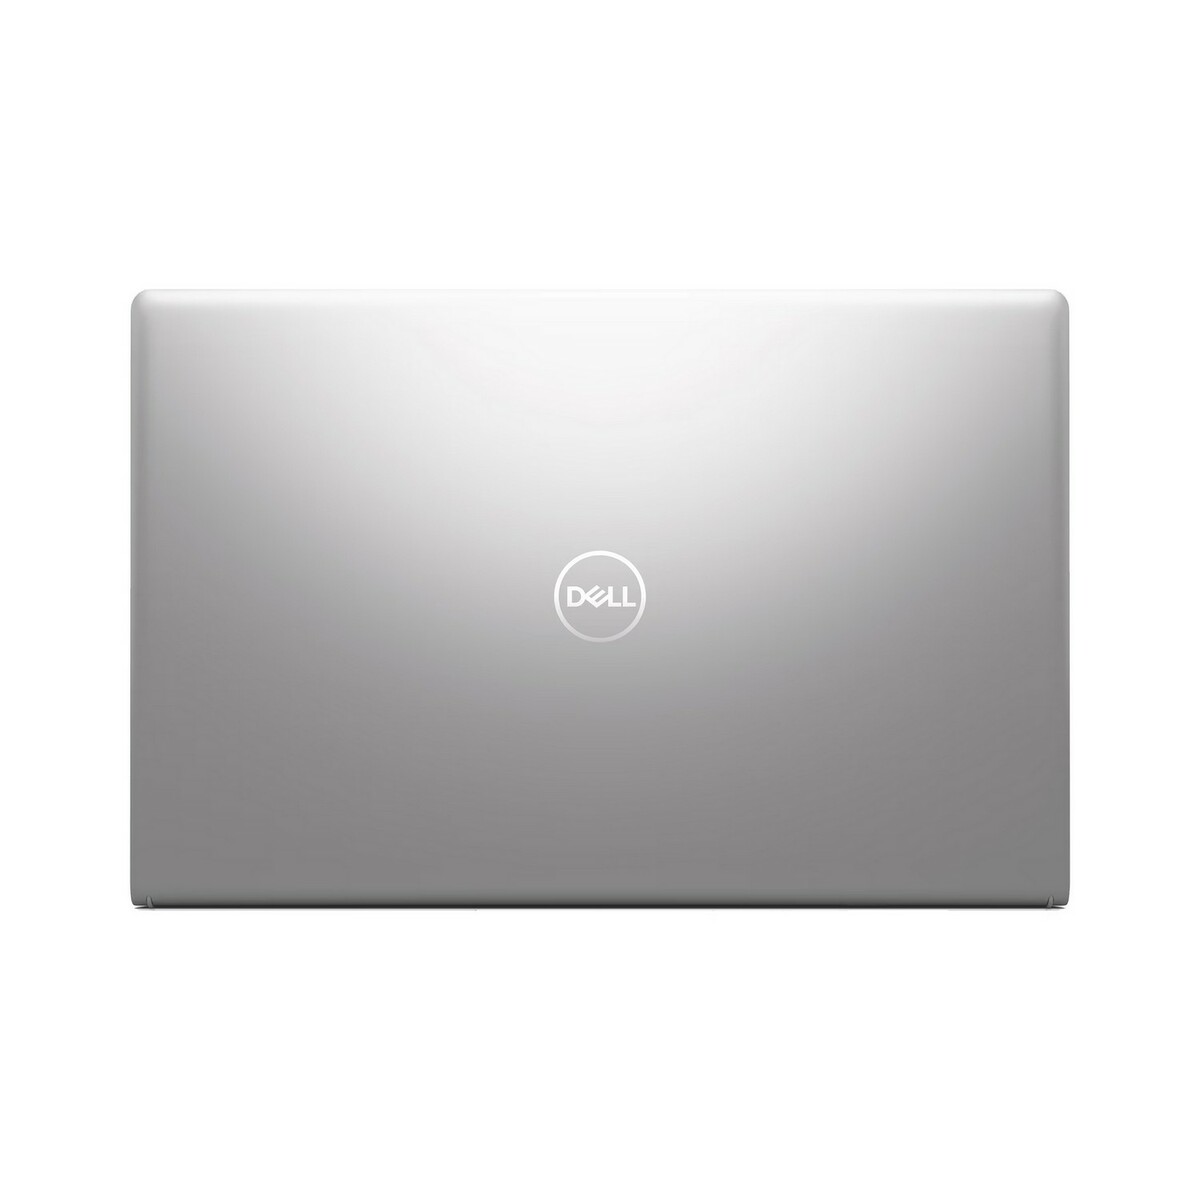 DELL Notebook Inspiron 3515 AMD R3 15.6" Win10+MS Office Siver